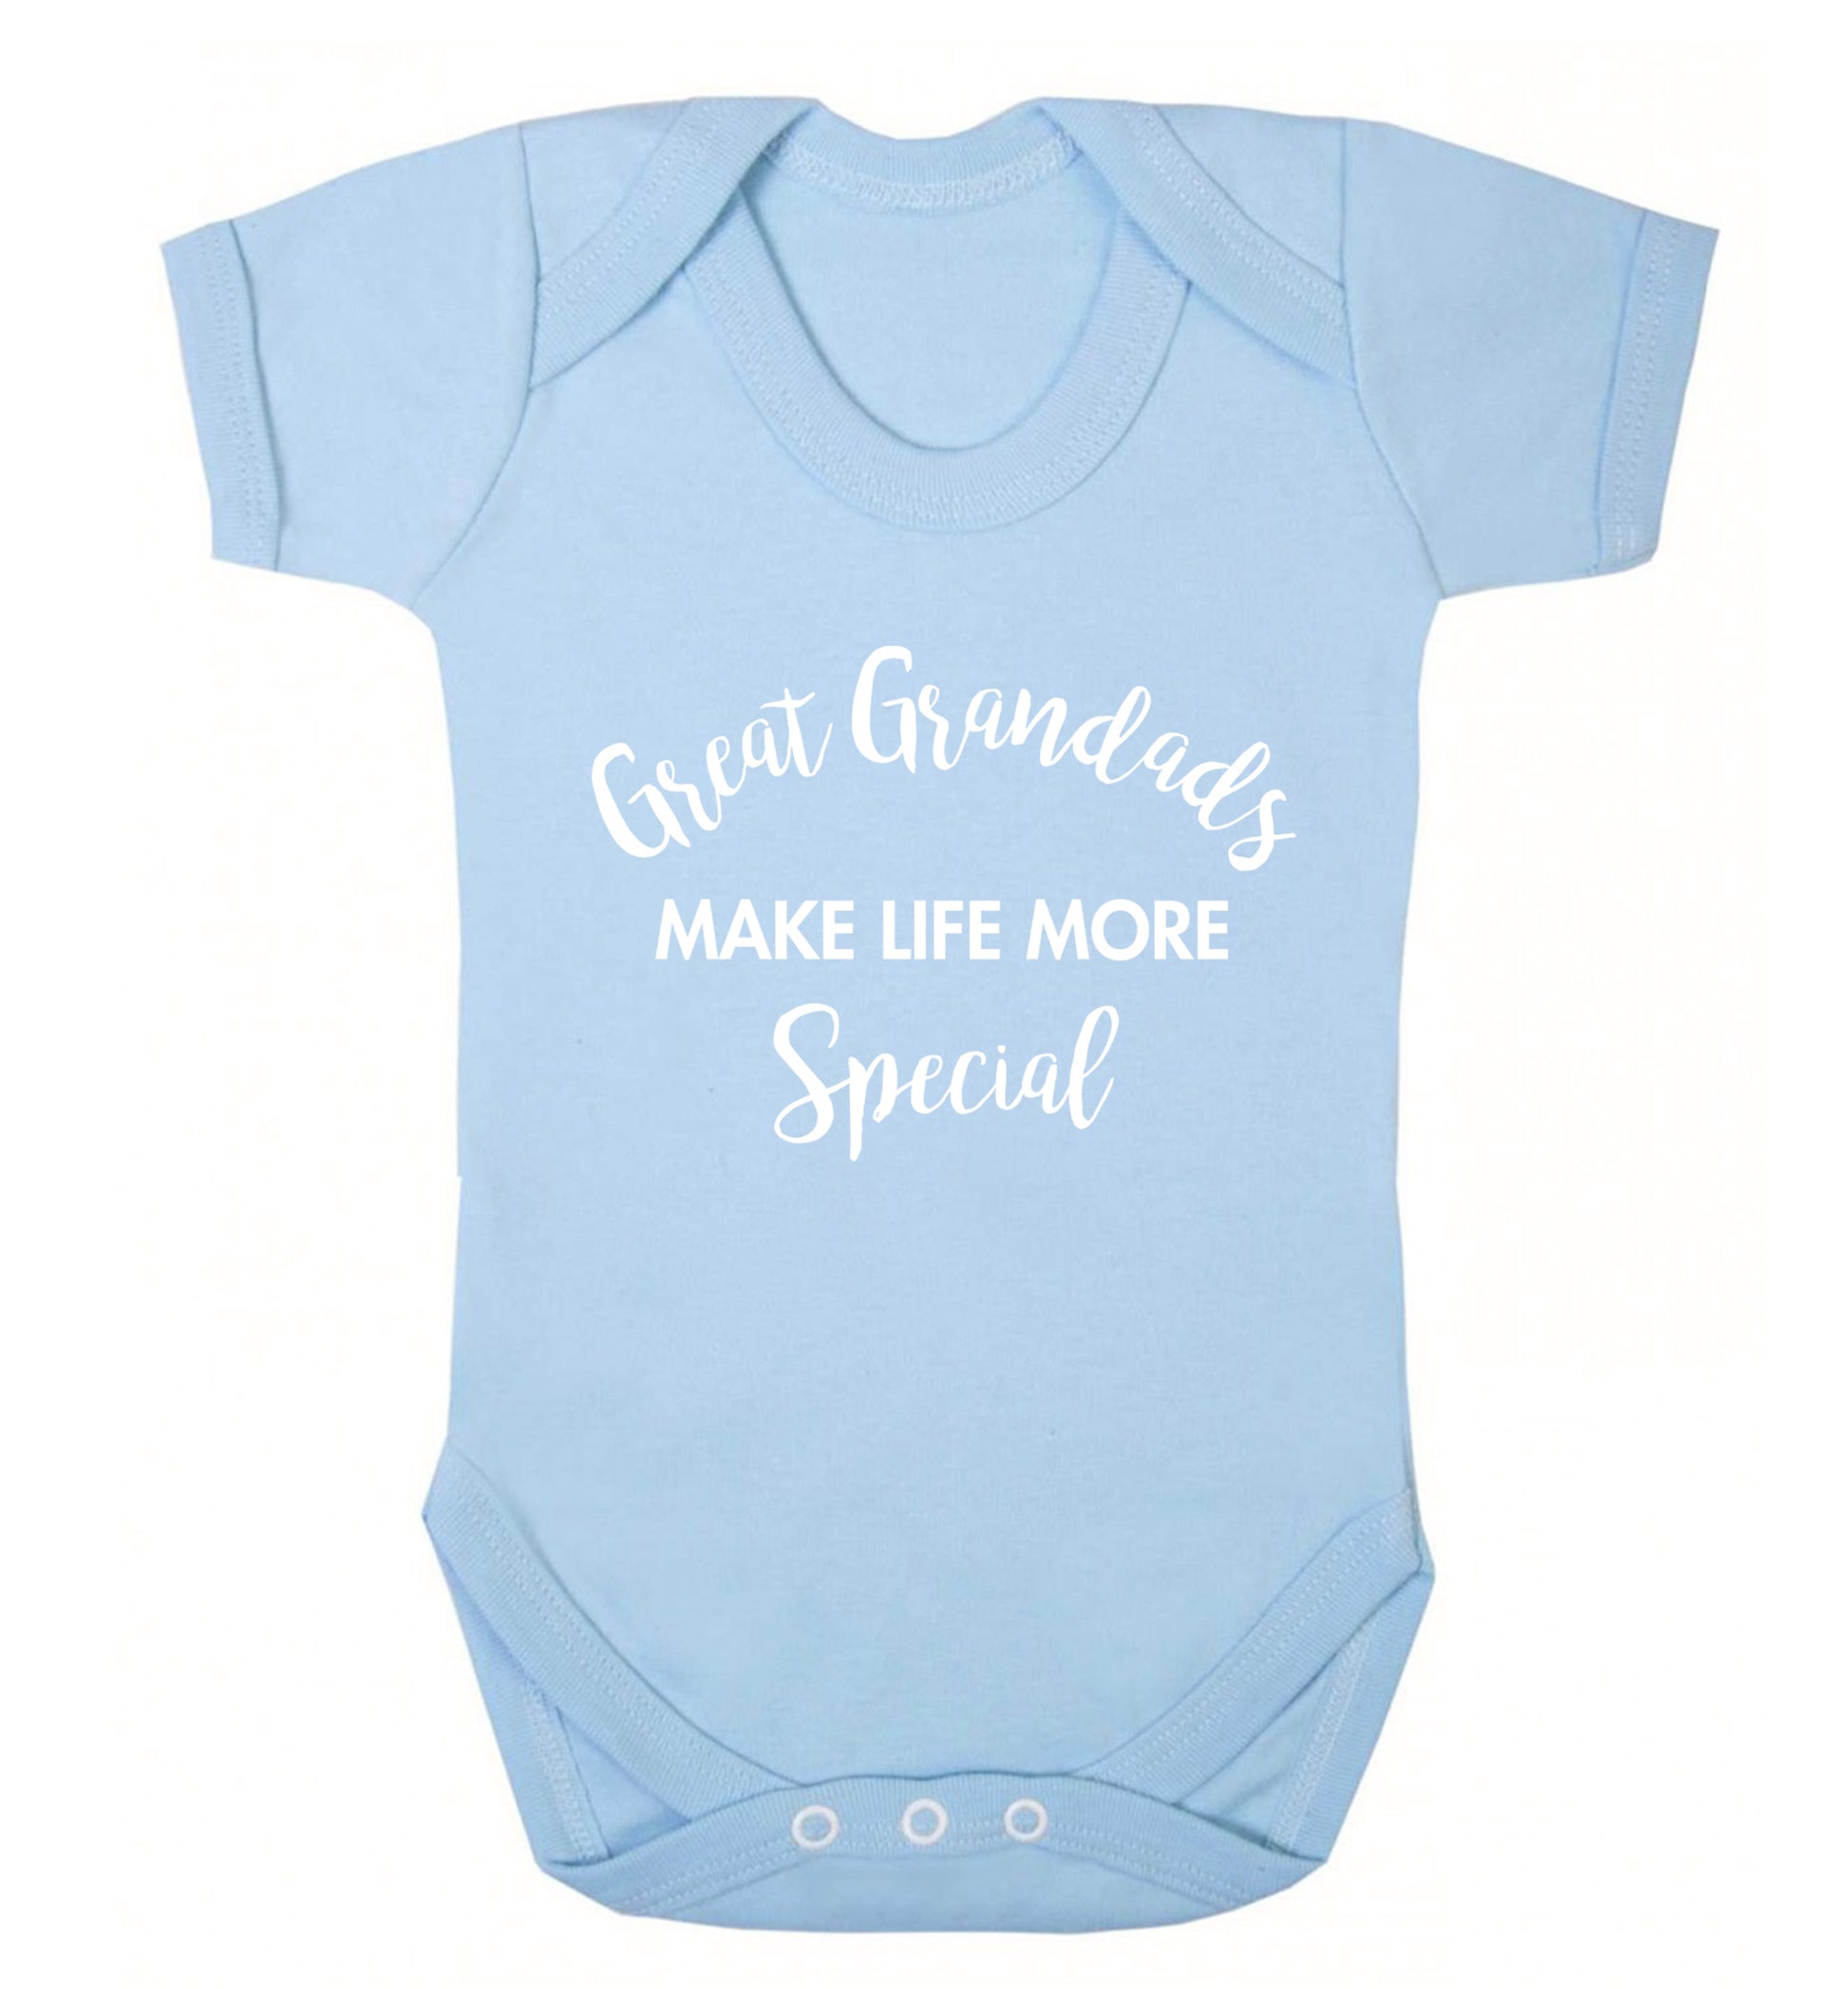 Great Grandads make life more special Baby Vest pale blue 18-24 months